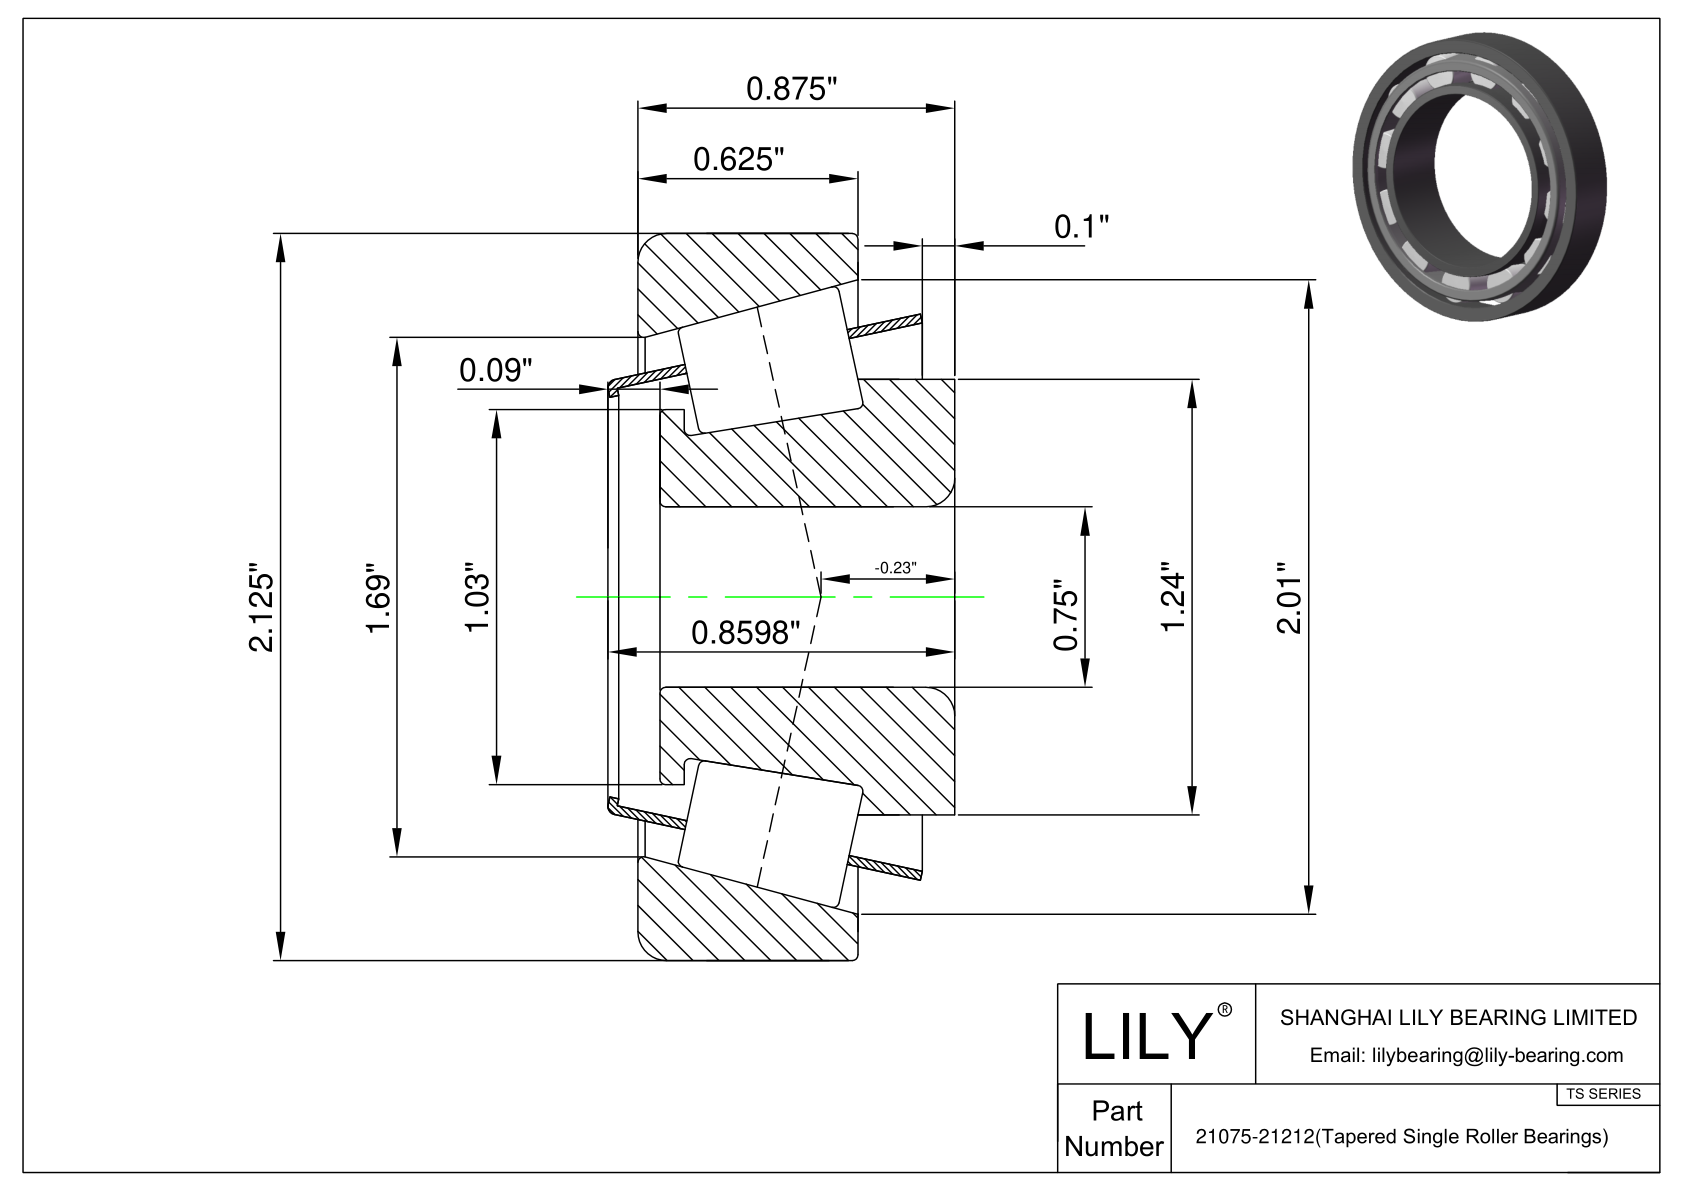 21075-21212 TS (Tapered Single Roller Bearings) (Imperial) cad drawing